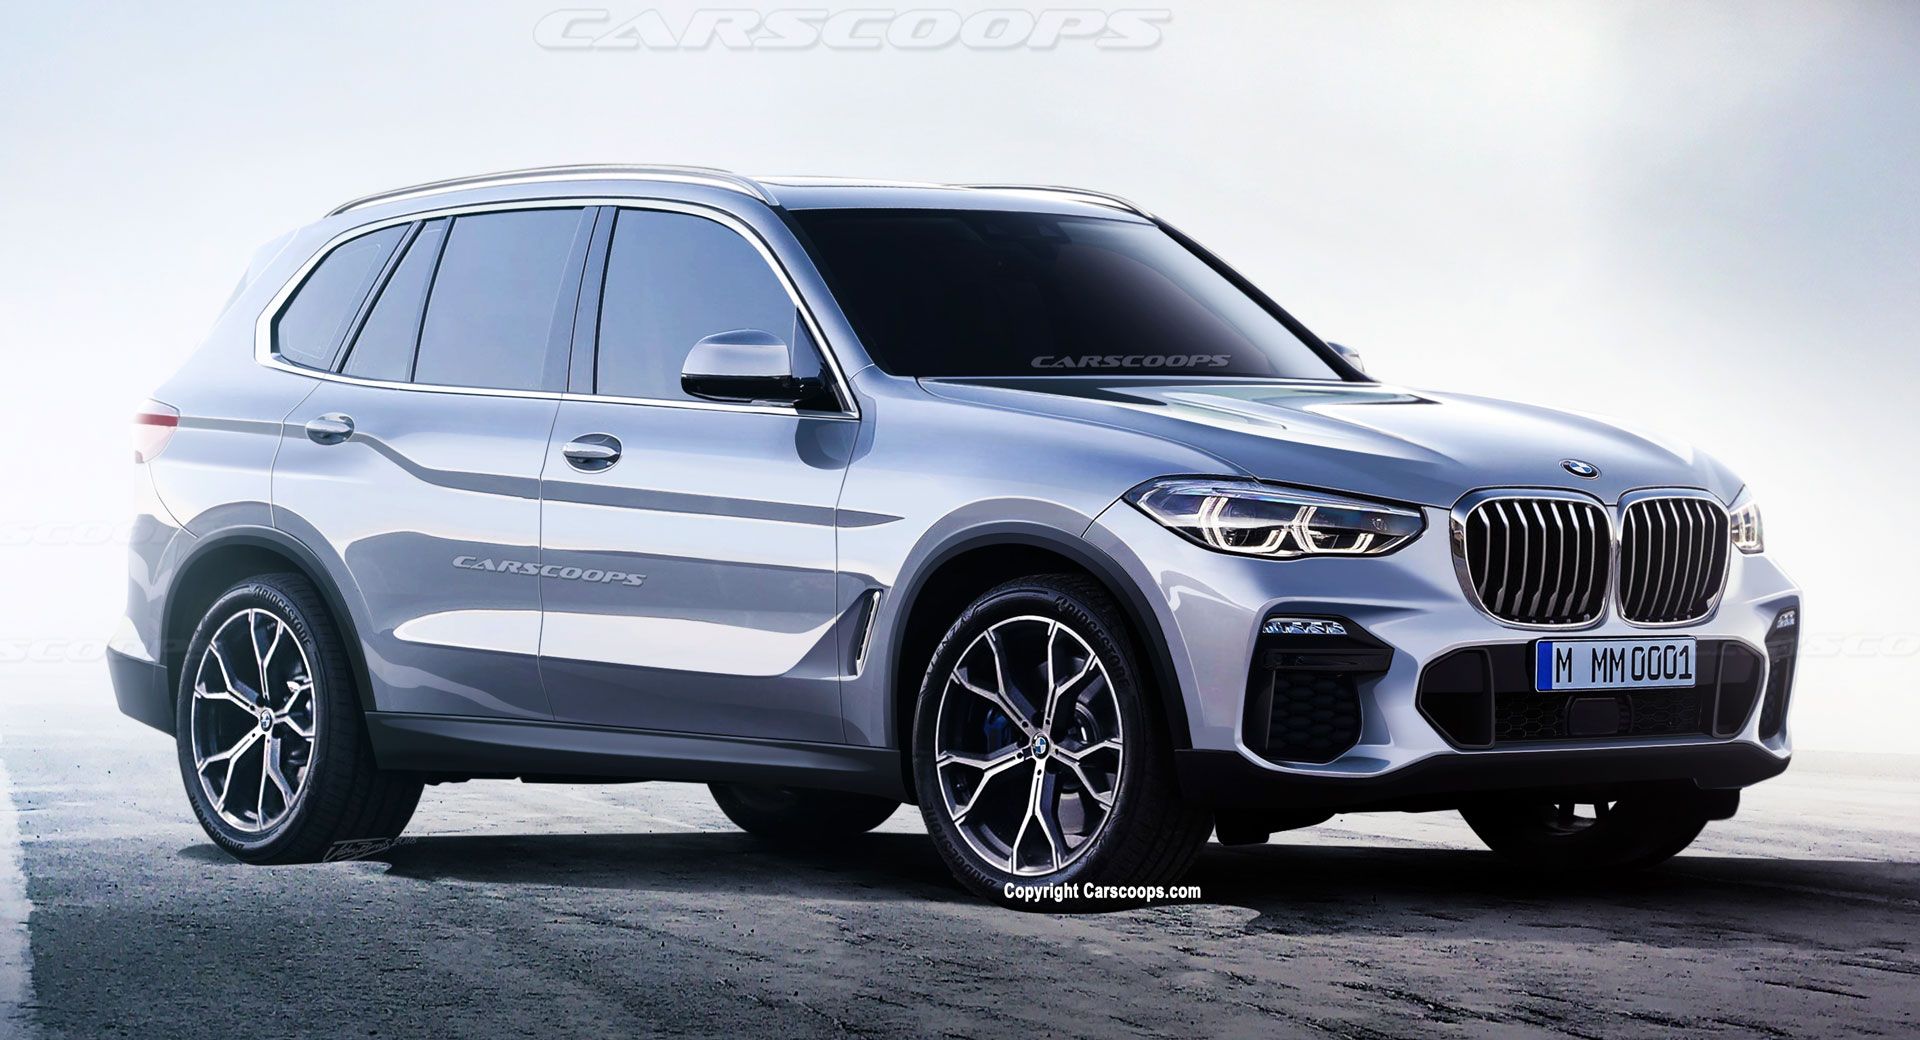 2019 BMW X5: What It’ll Look Like, Specs, Release Date And ...